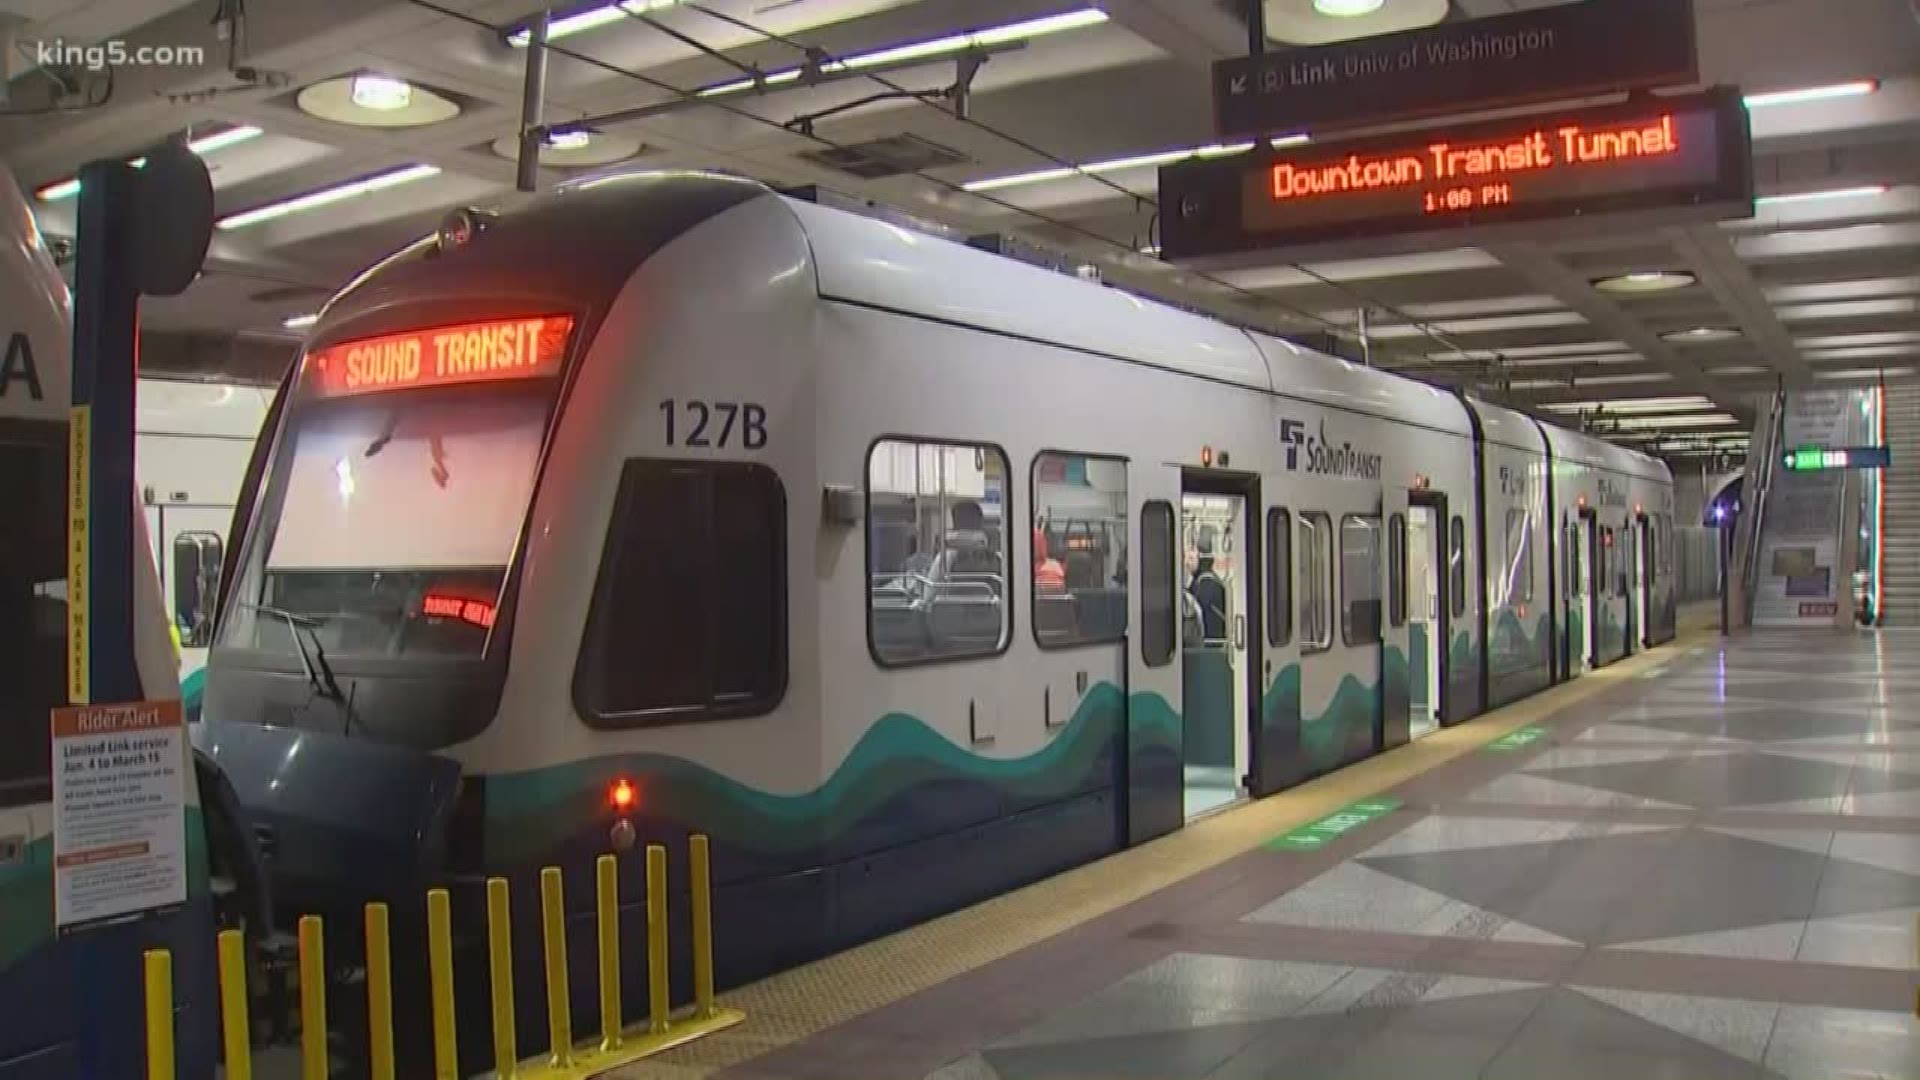 Both Sound Transit and Washington State Ferries are undergoing major construction and asking for passengers to be patient over the next few weeks.